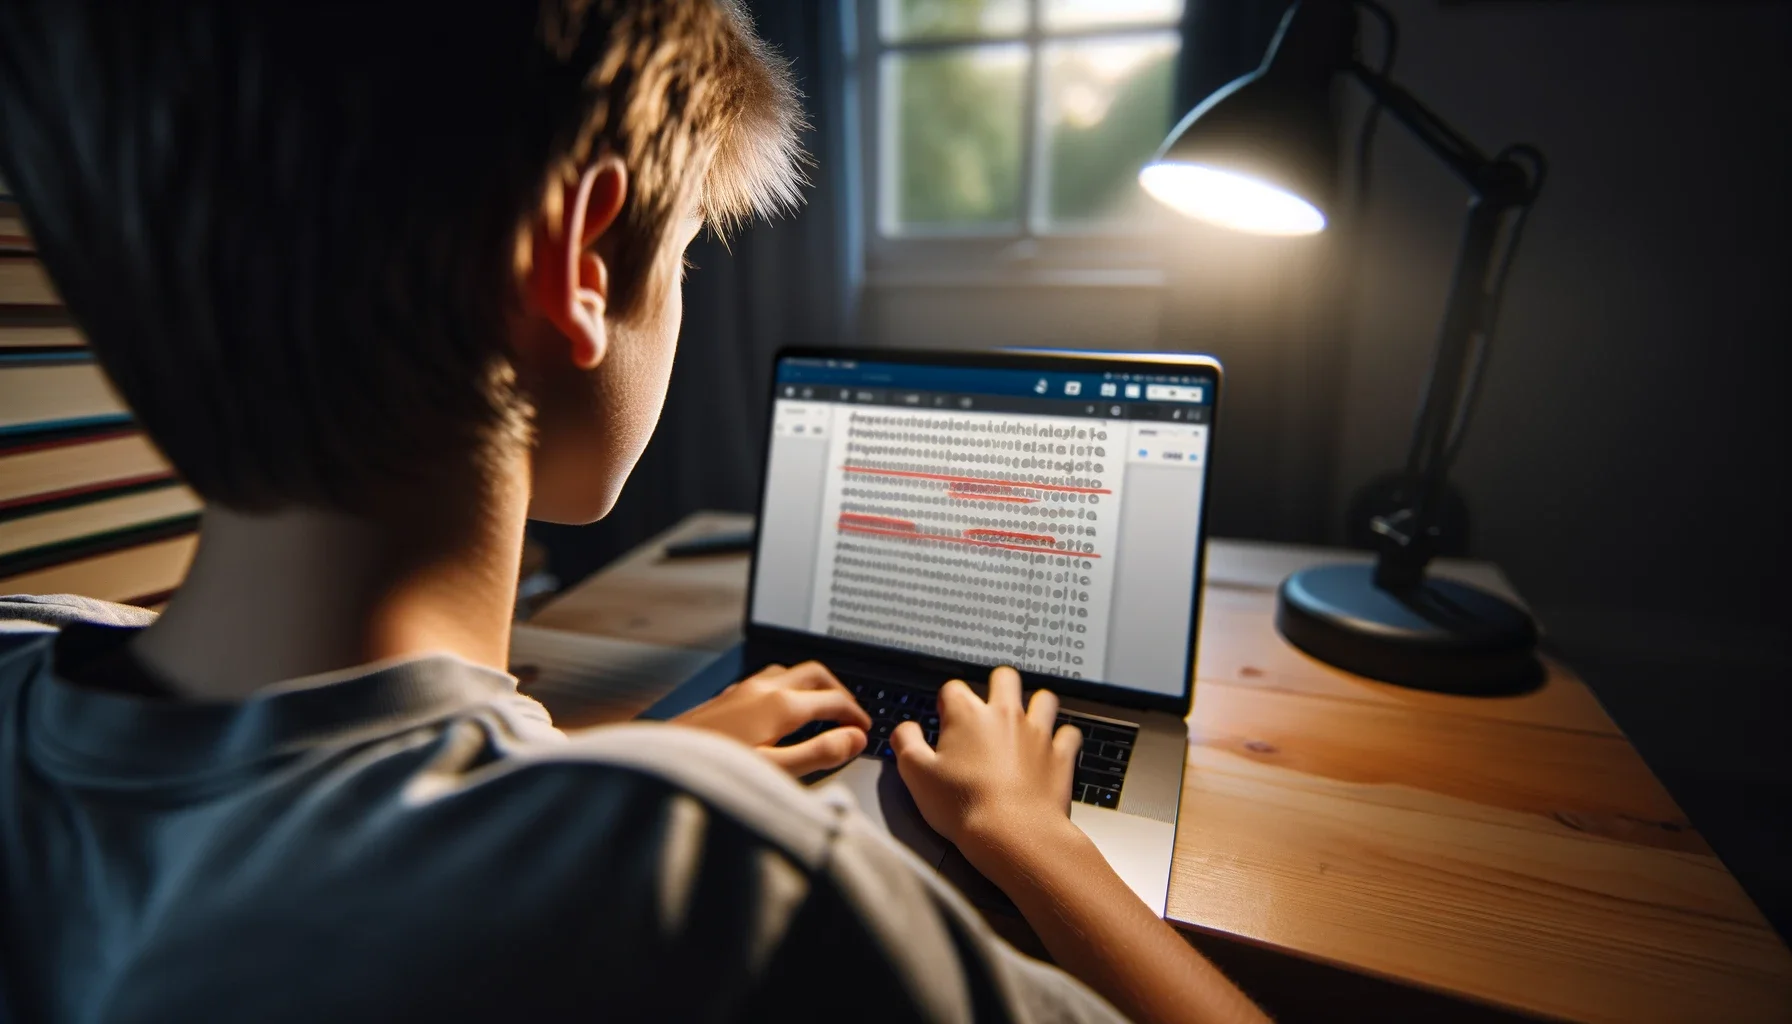 A realistic image showing a boy sitting in front of a laptop, viewed from over the boy's shoulder. the laptop screen is visible, displaying a text doc